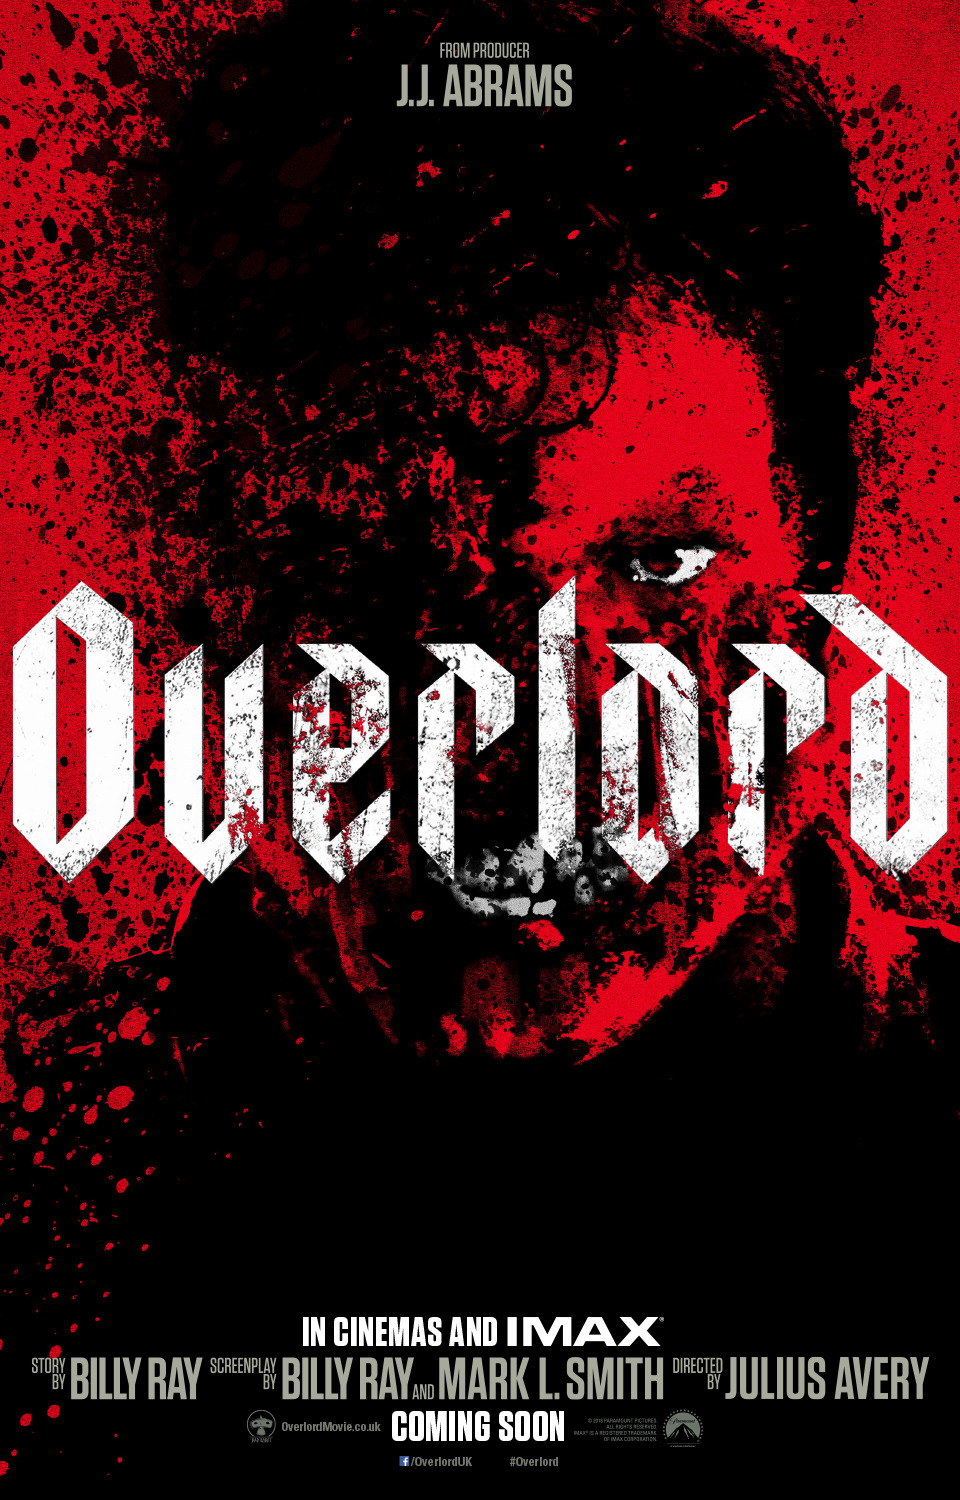 Overlord film review: soldiers vs Nazi monsters in Bad Robot’s WW2 horror